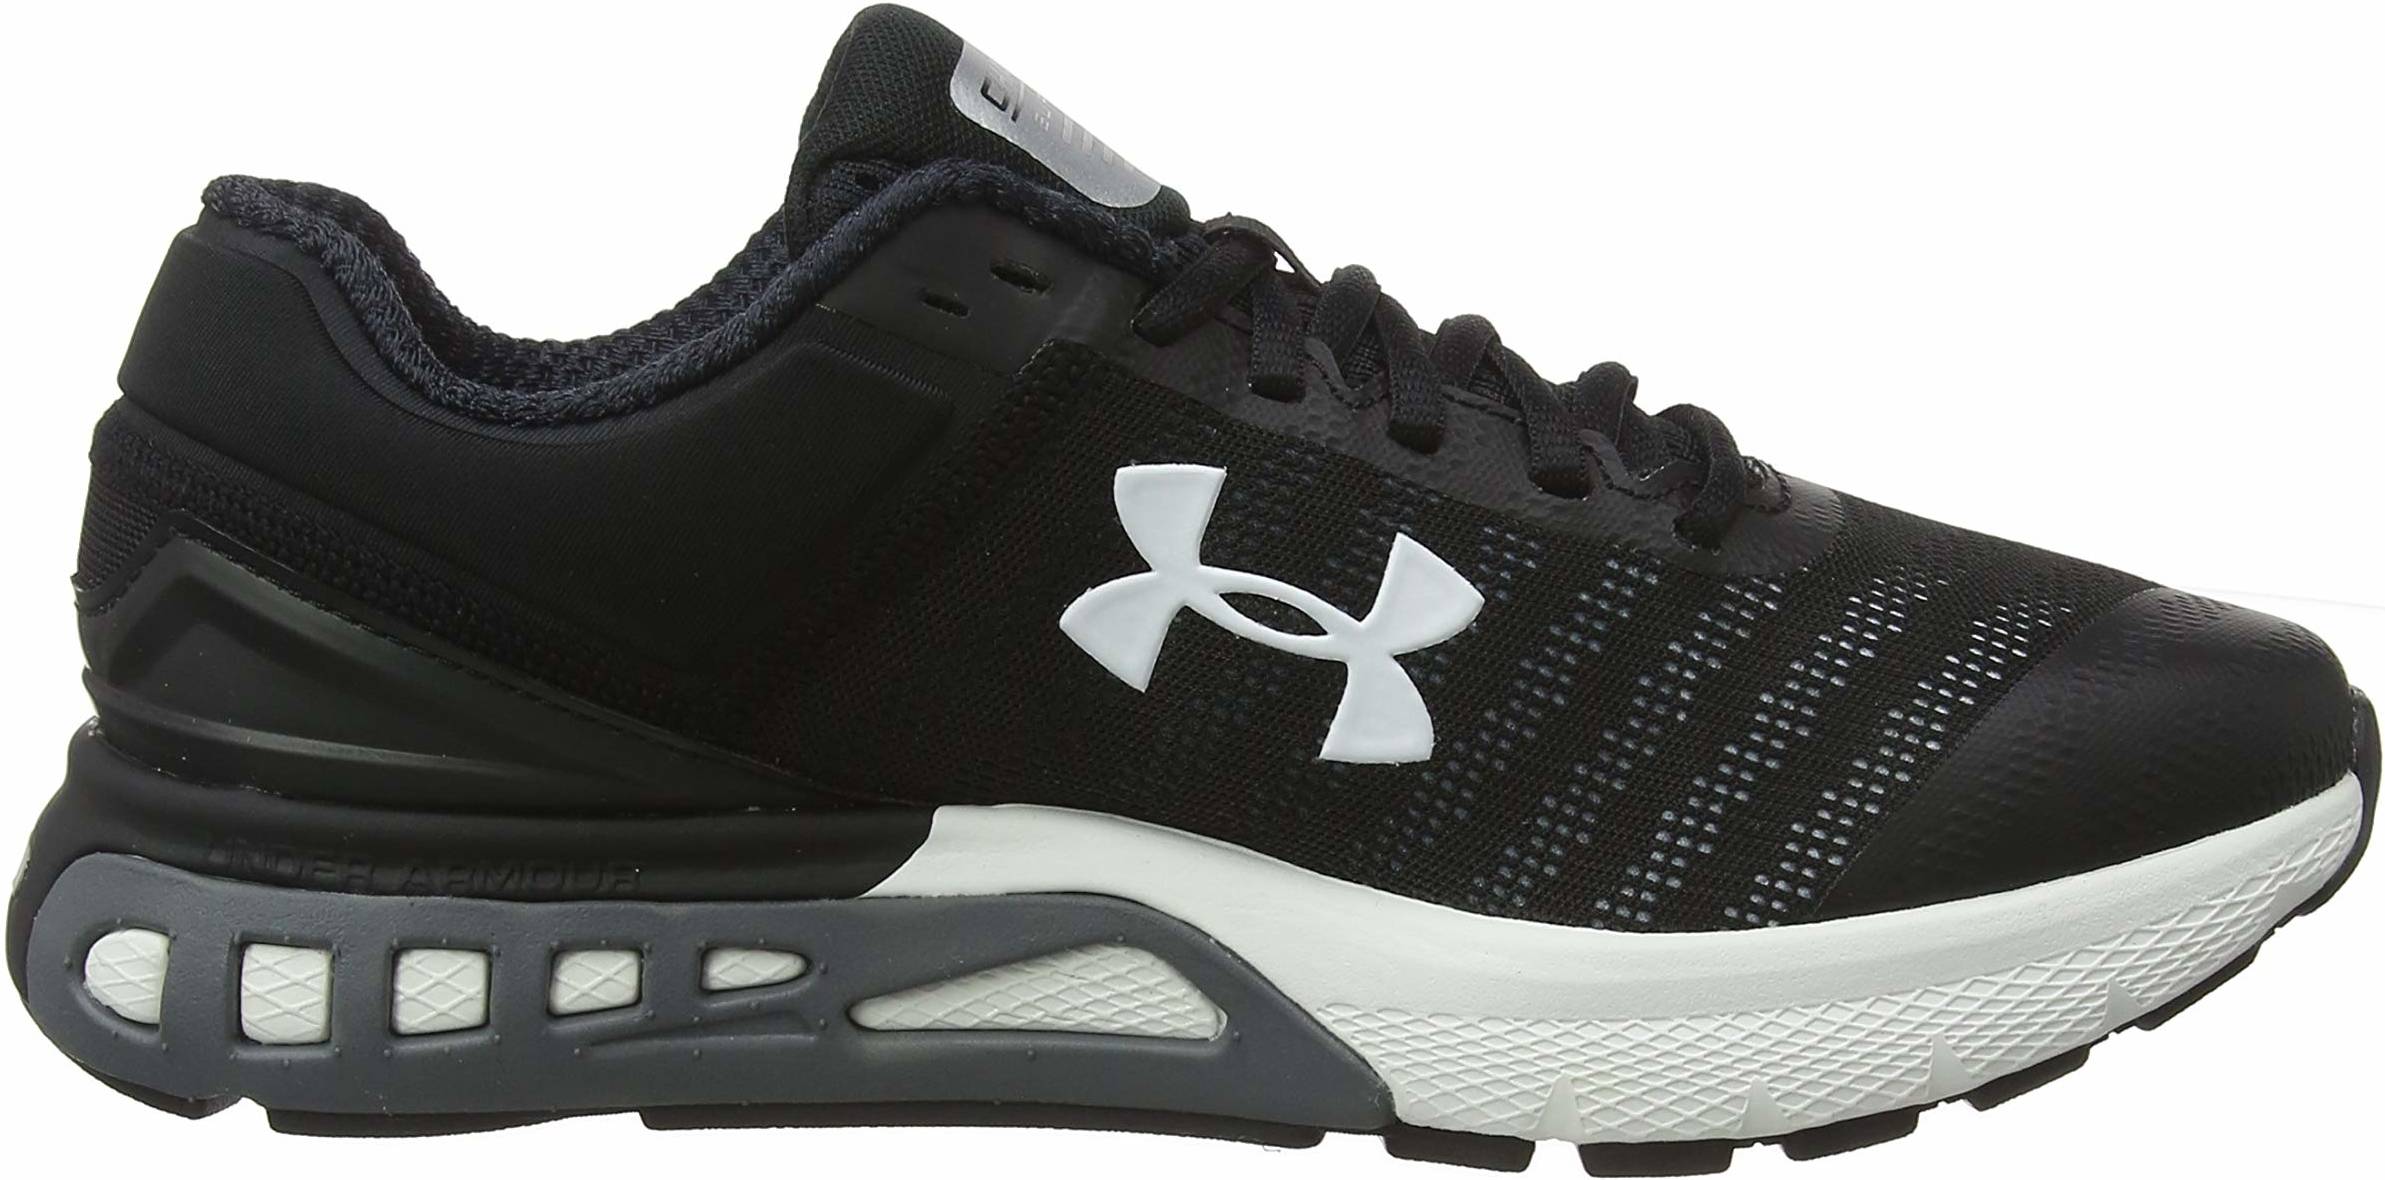 Review of Under Armour Charged Europa 2 